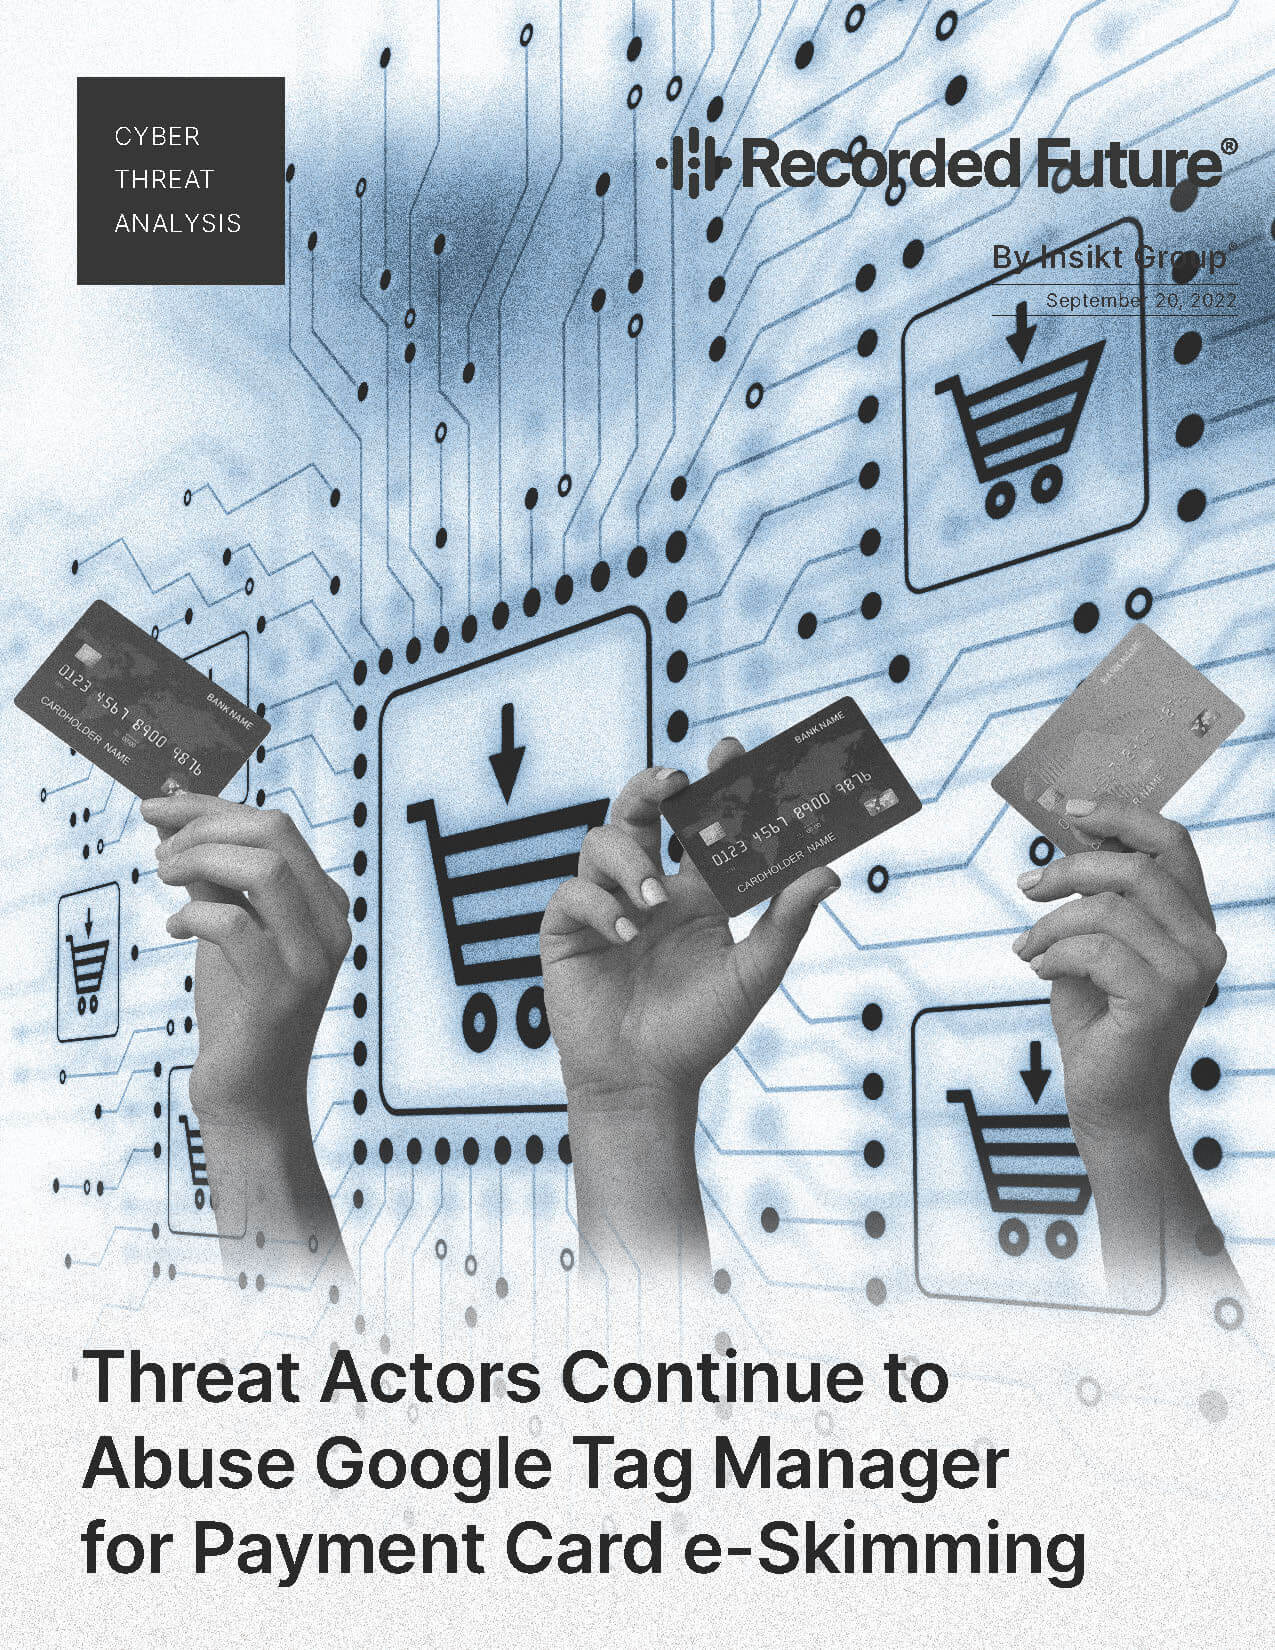 Threat Actors Continue to Abuse Google Tag Manager for Payment Card e-Skimming